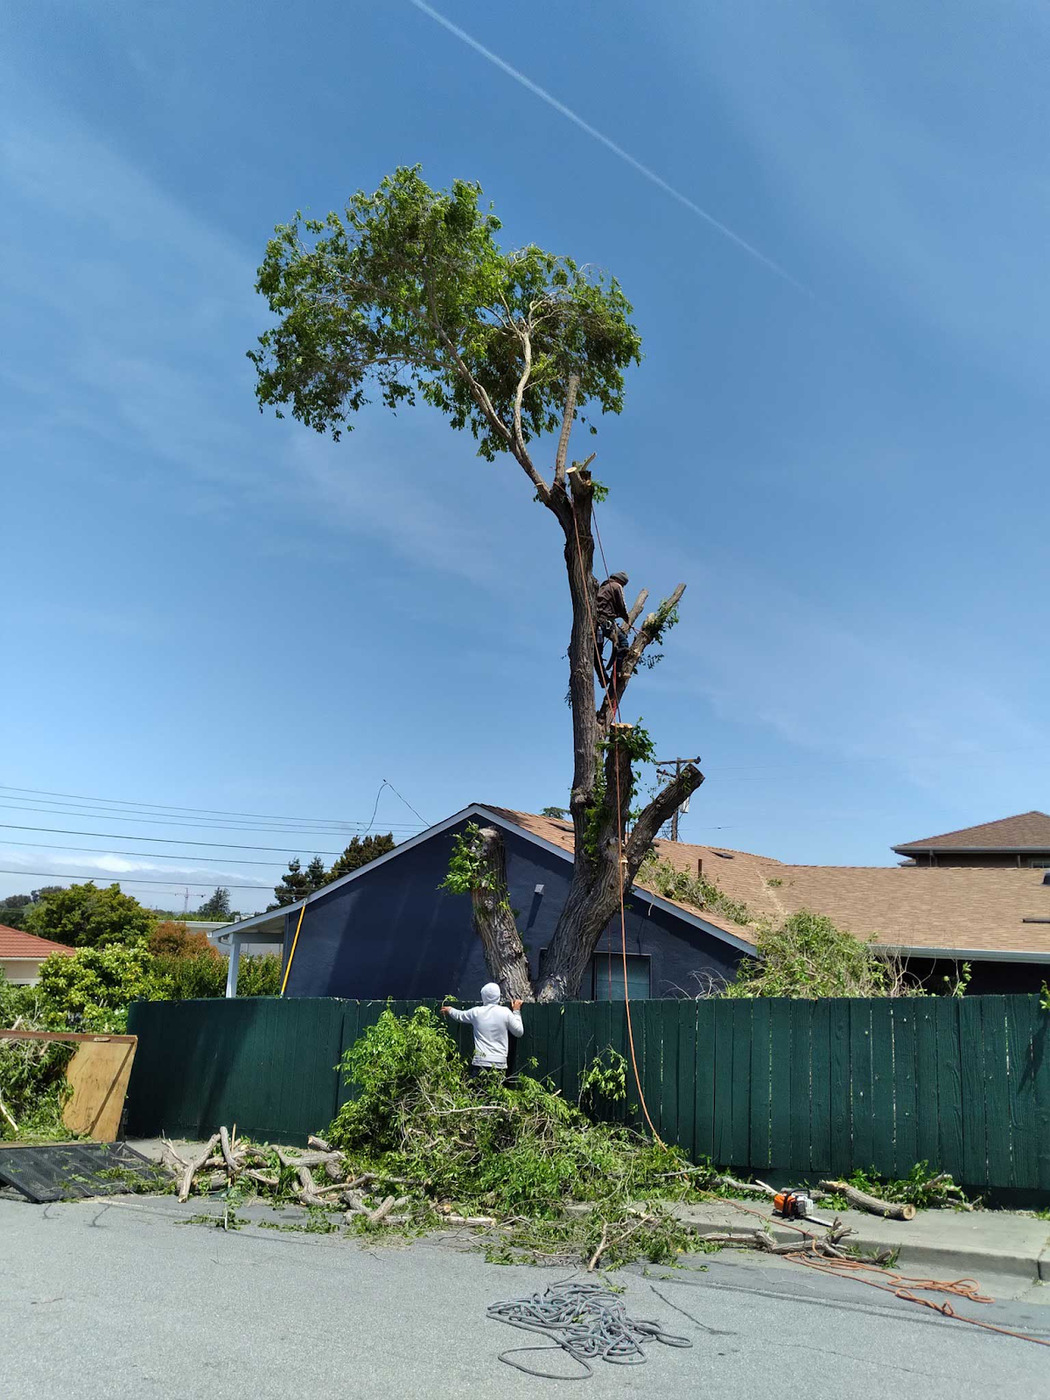 New Horizon Tree Services has been a trusted provider of tree care solutions for over 10 years.